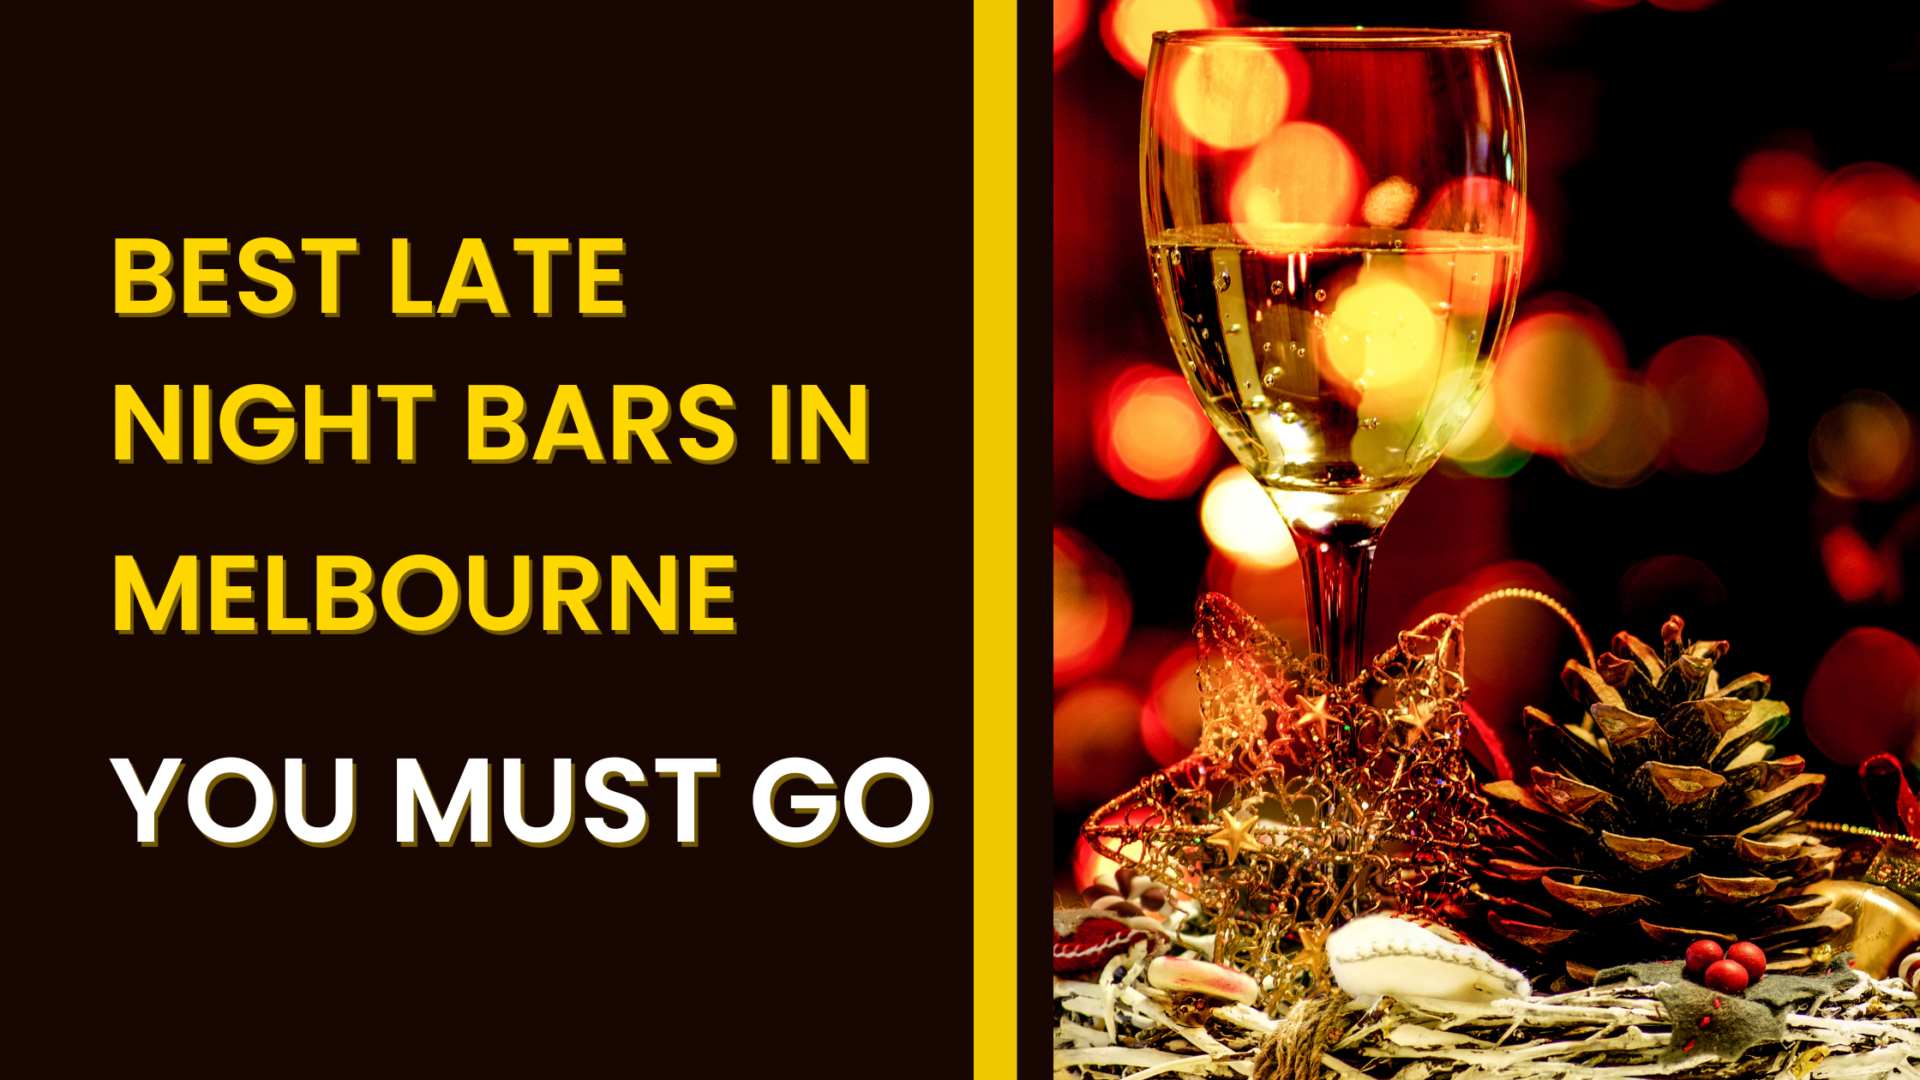 Best late night bars in Melbourne